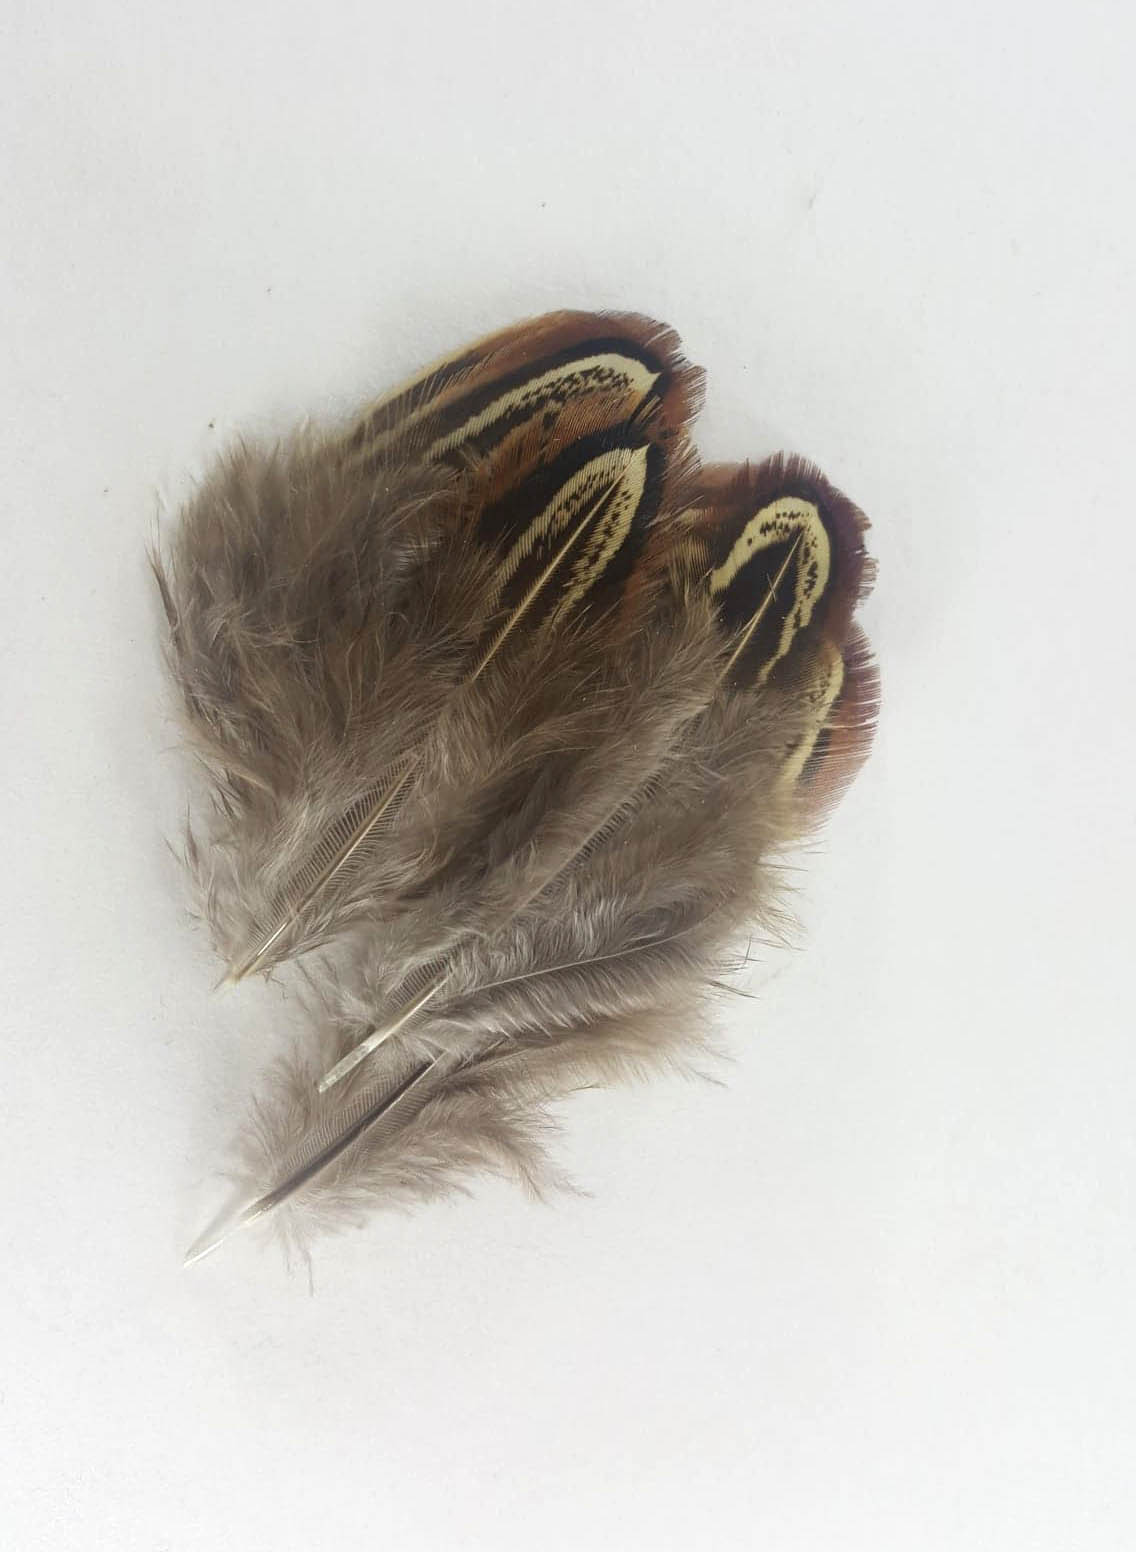 Small brown feathers